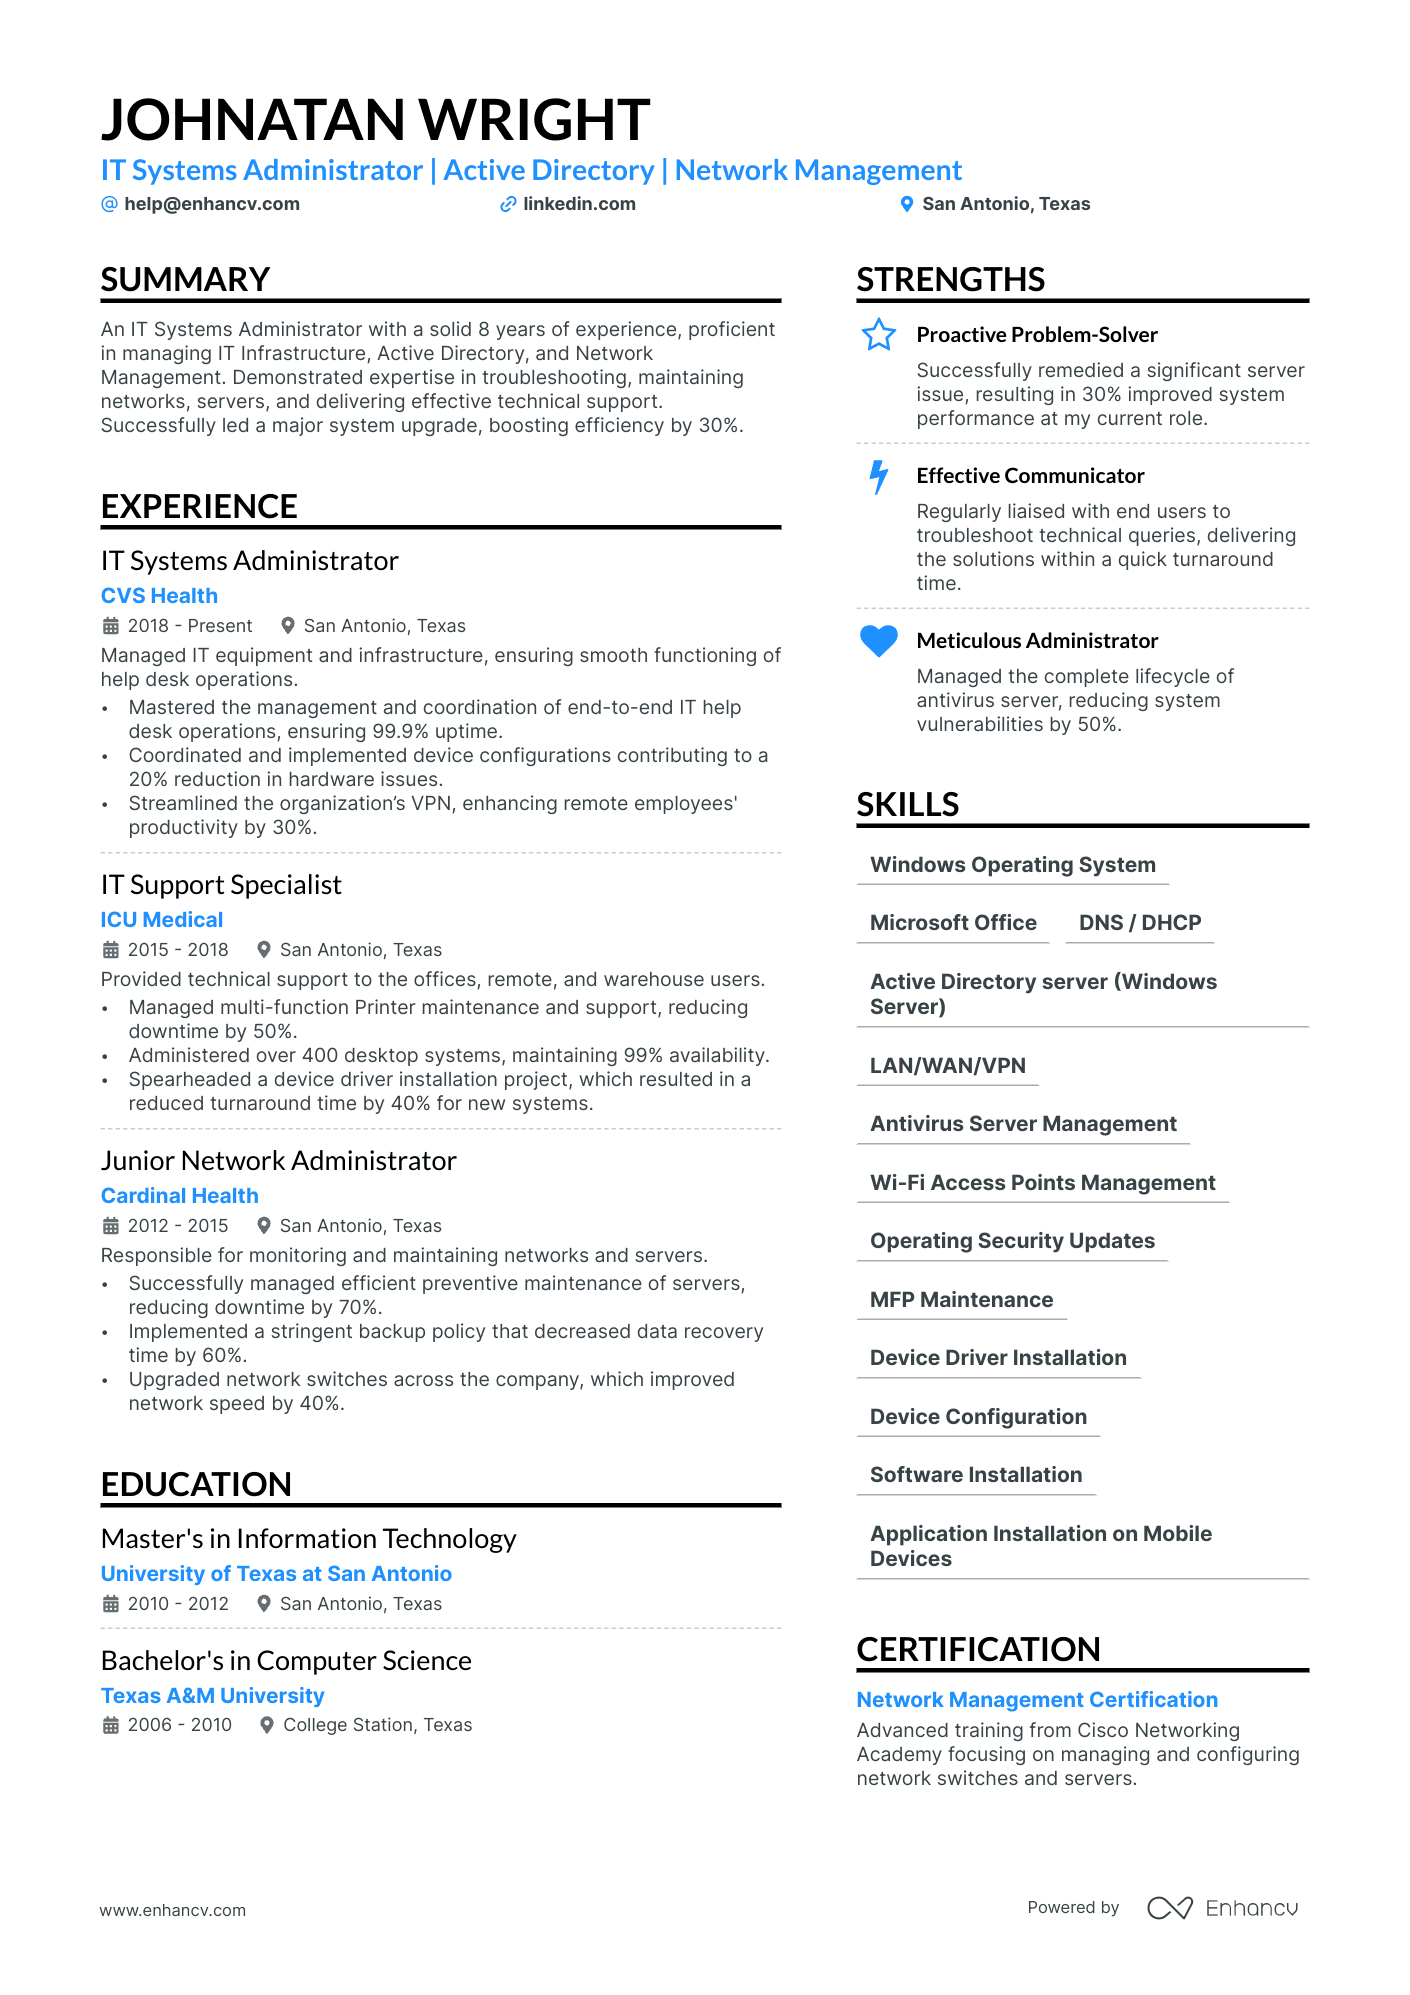 IT System Administrator resume example